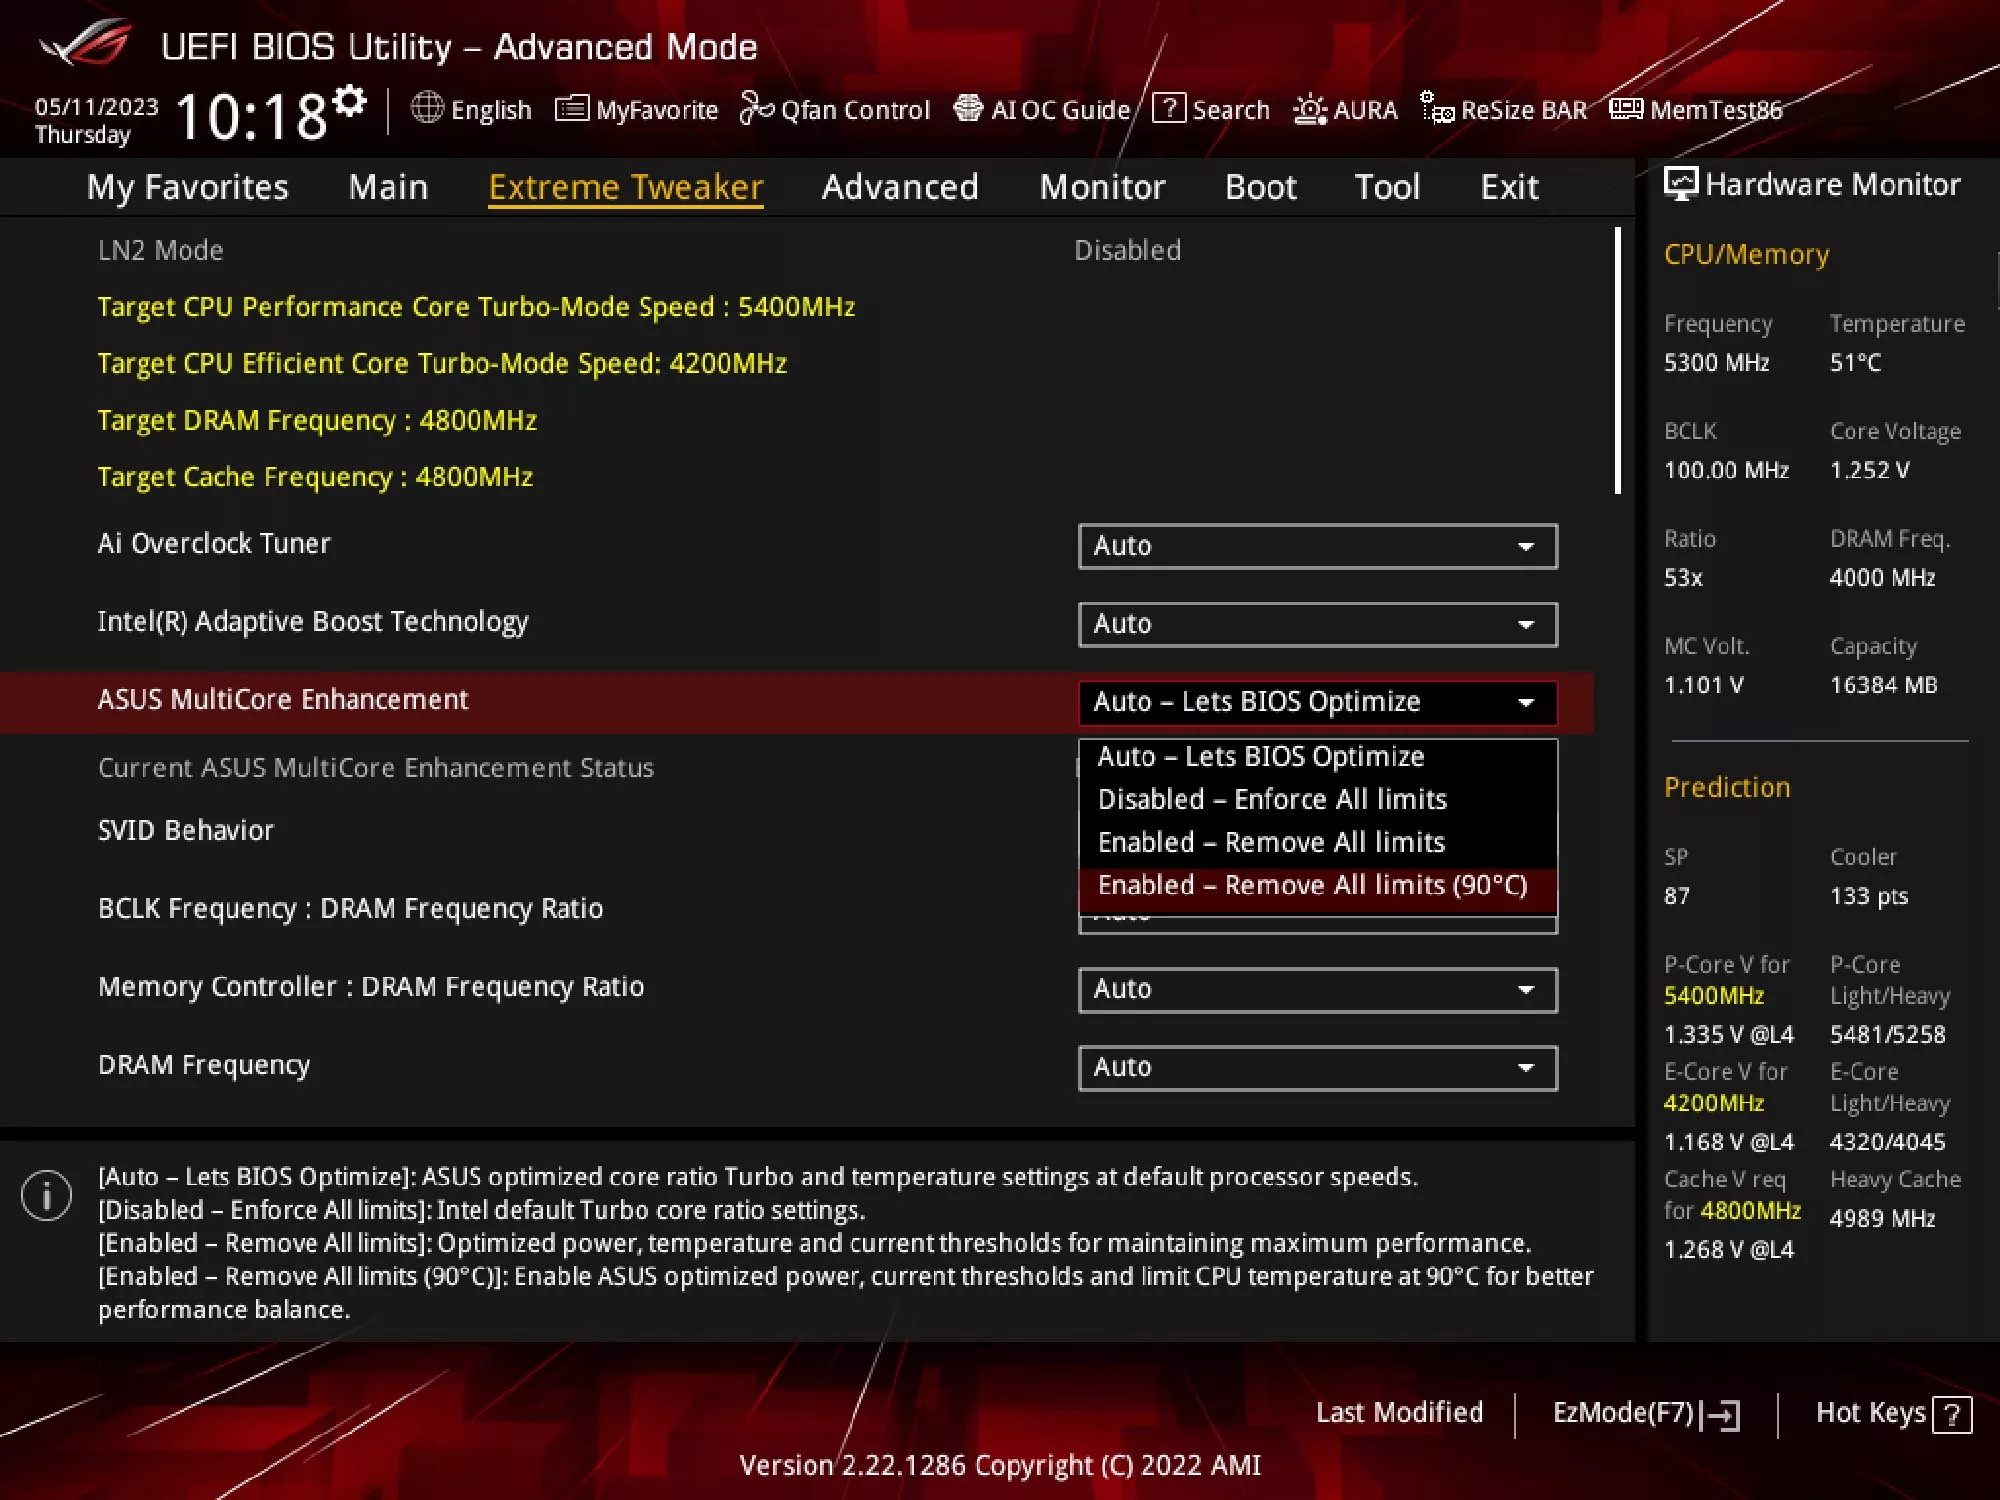 Screenshot of the UEFI Bios showing the options for ASUS MultiCore Enhancement.